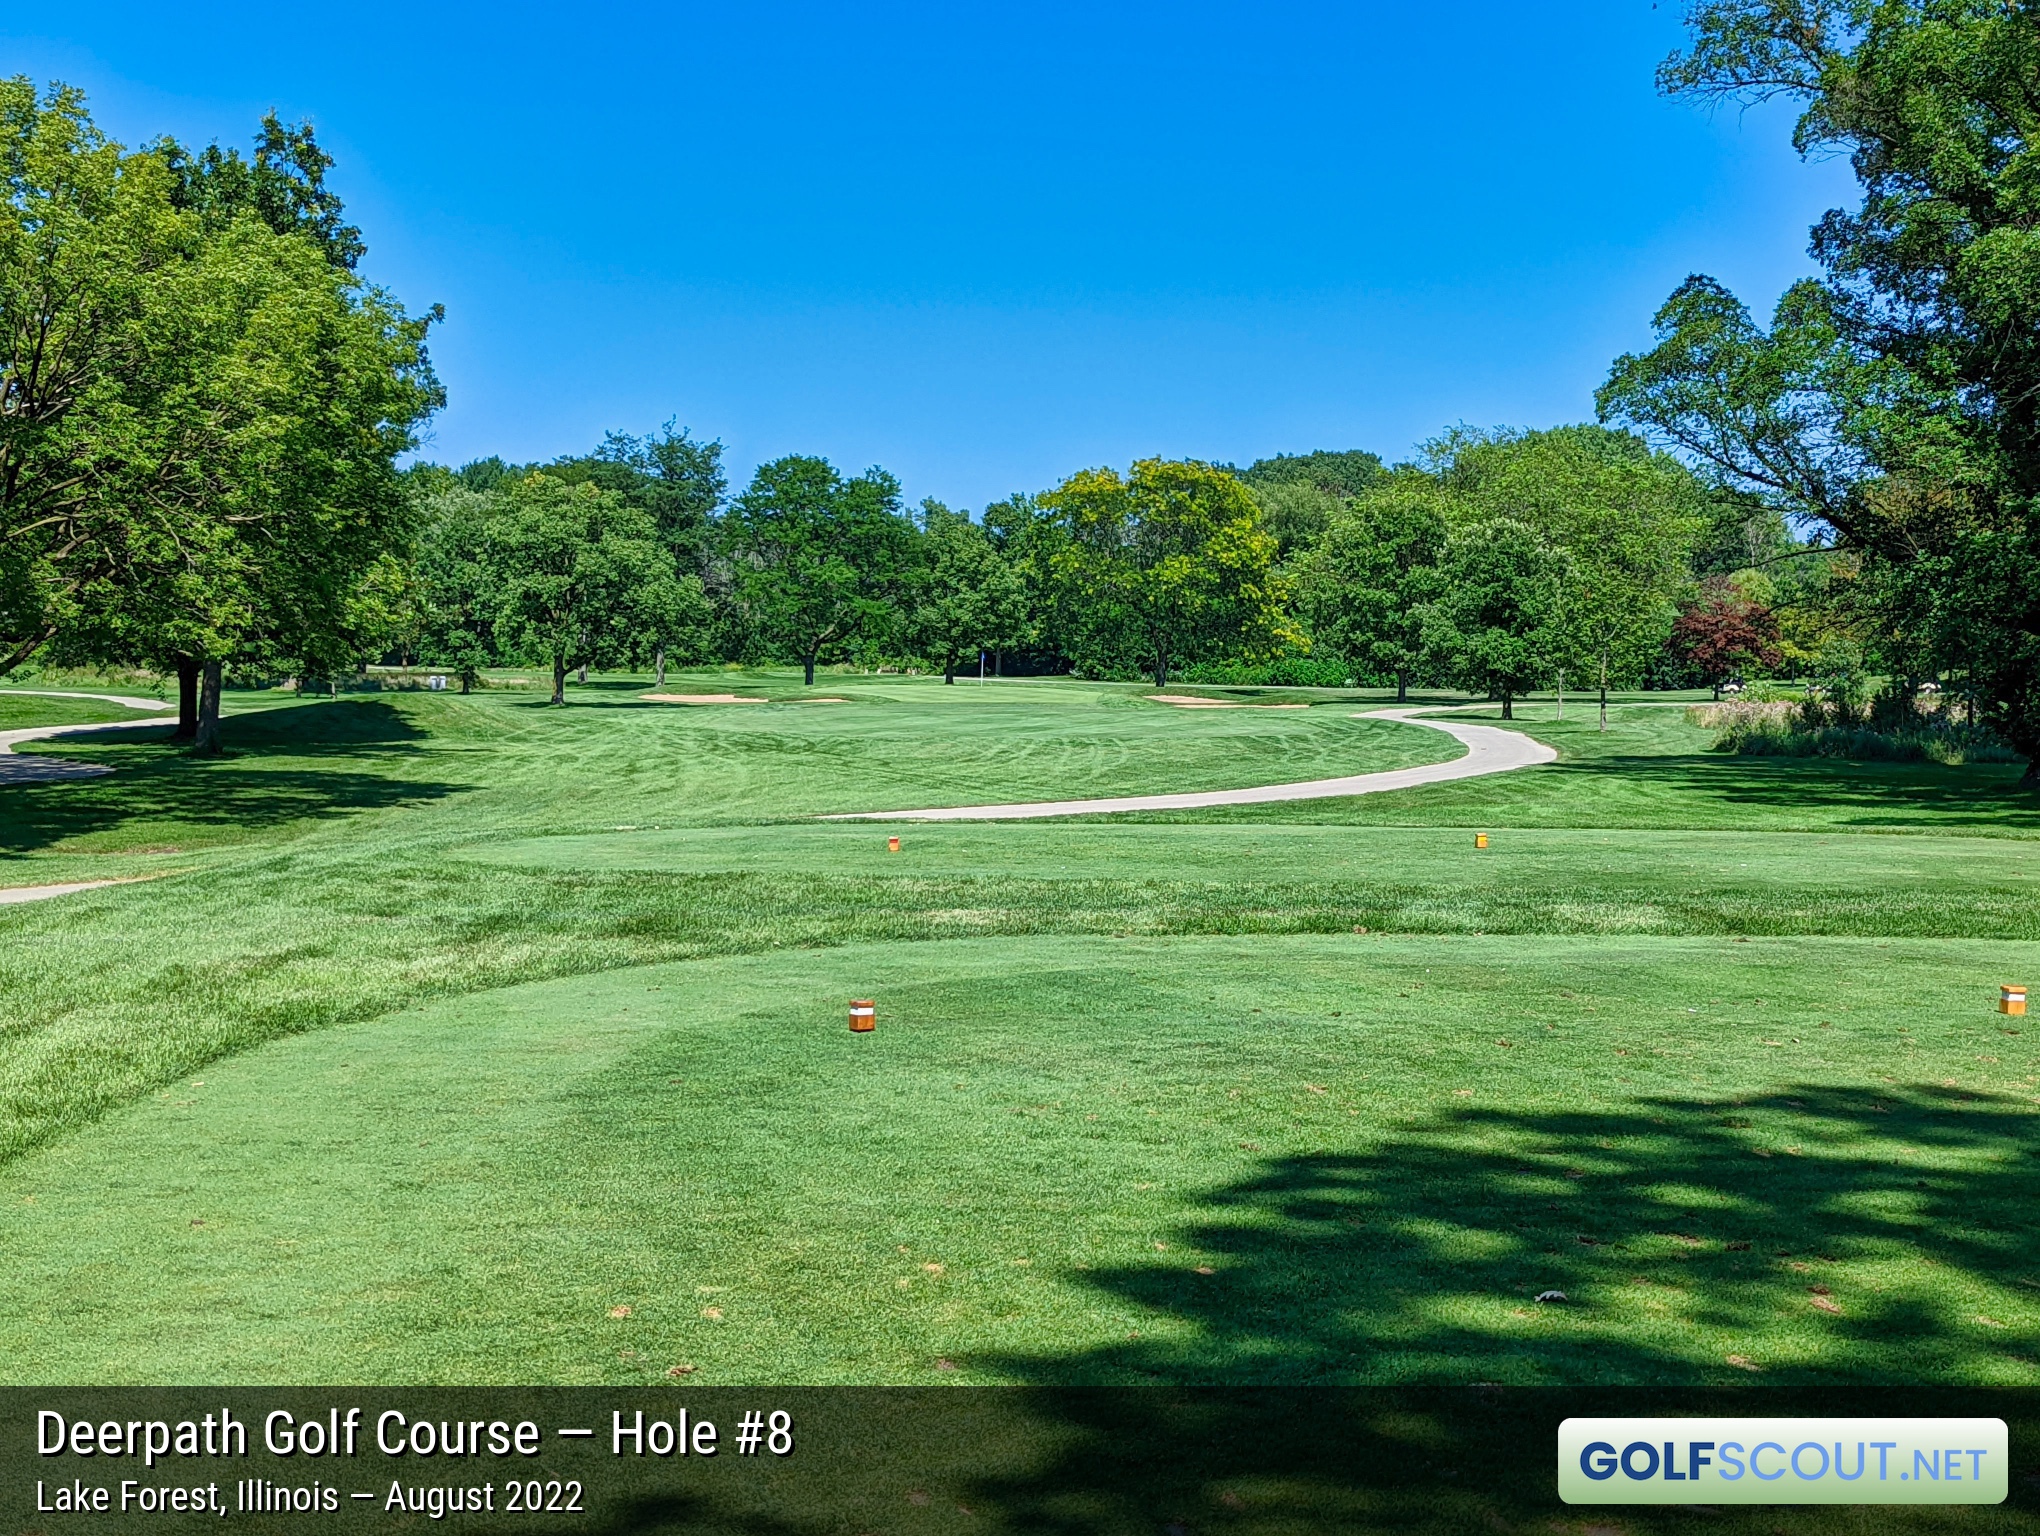 Photo of hole #8 at Deerpath Golf Course in Lake Forest, Illinois. 